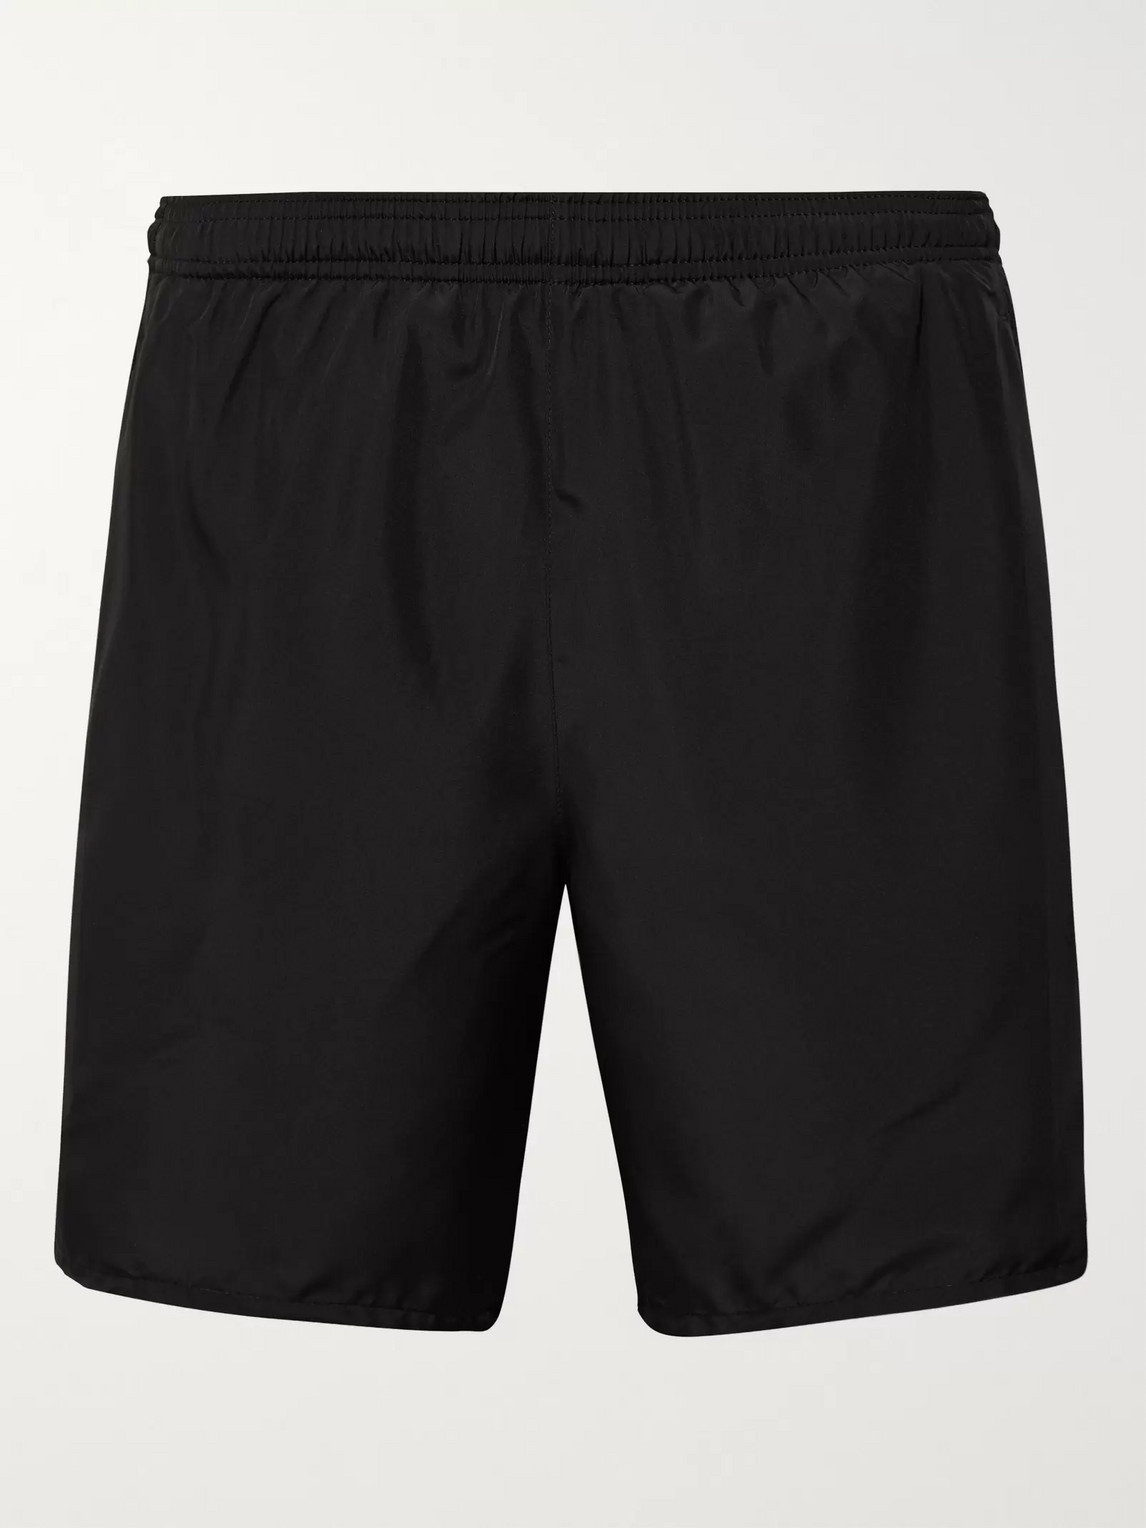 Nike Challenger Dri-fit Shorts In Black